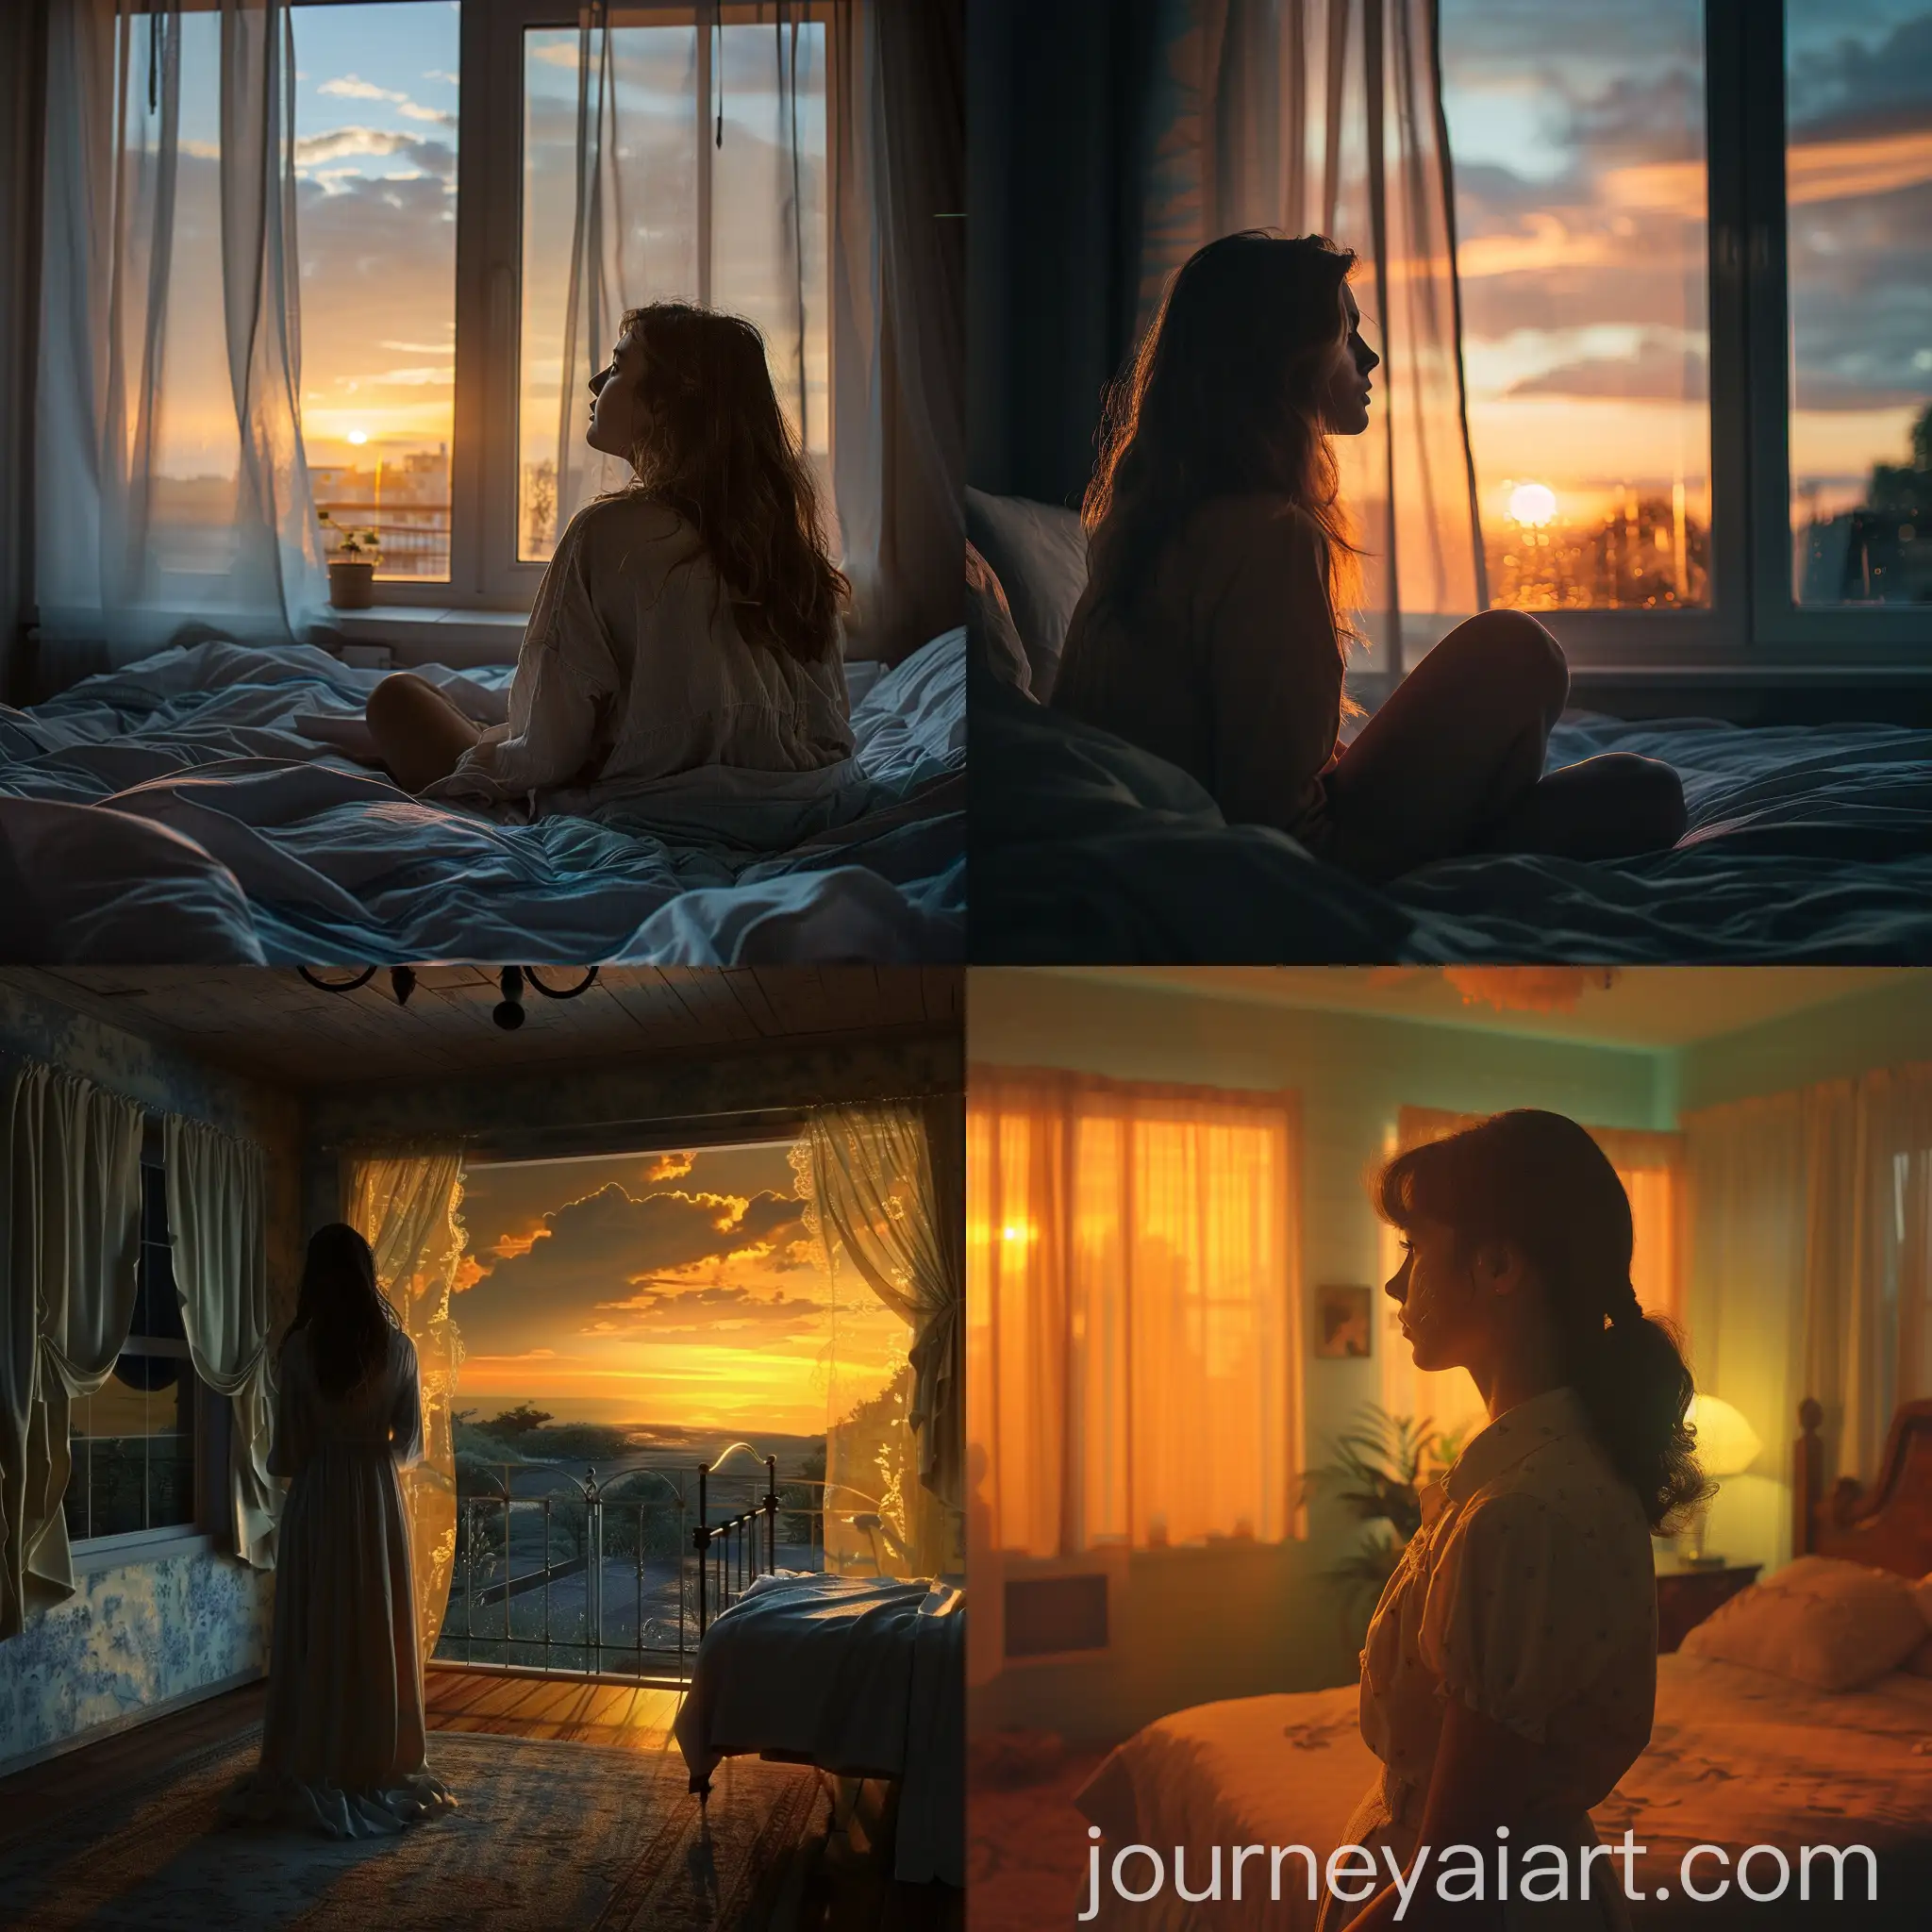 Young-Woman-Relaxing-in-Bedroom-at-Sunset